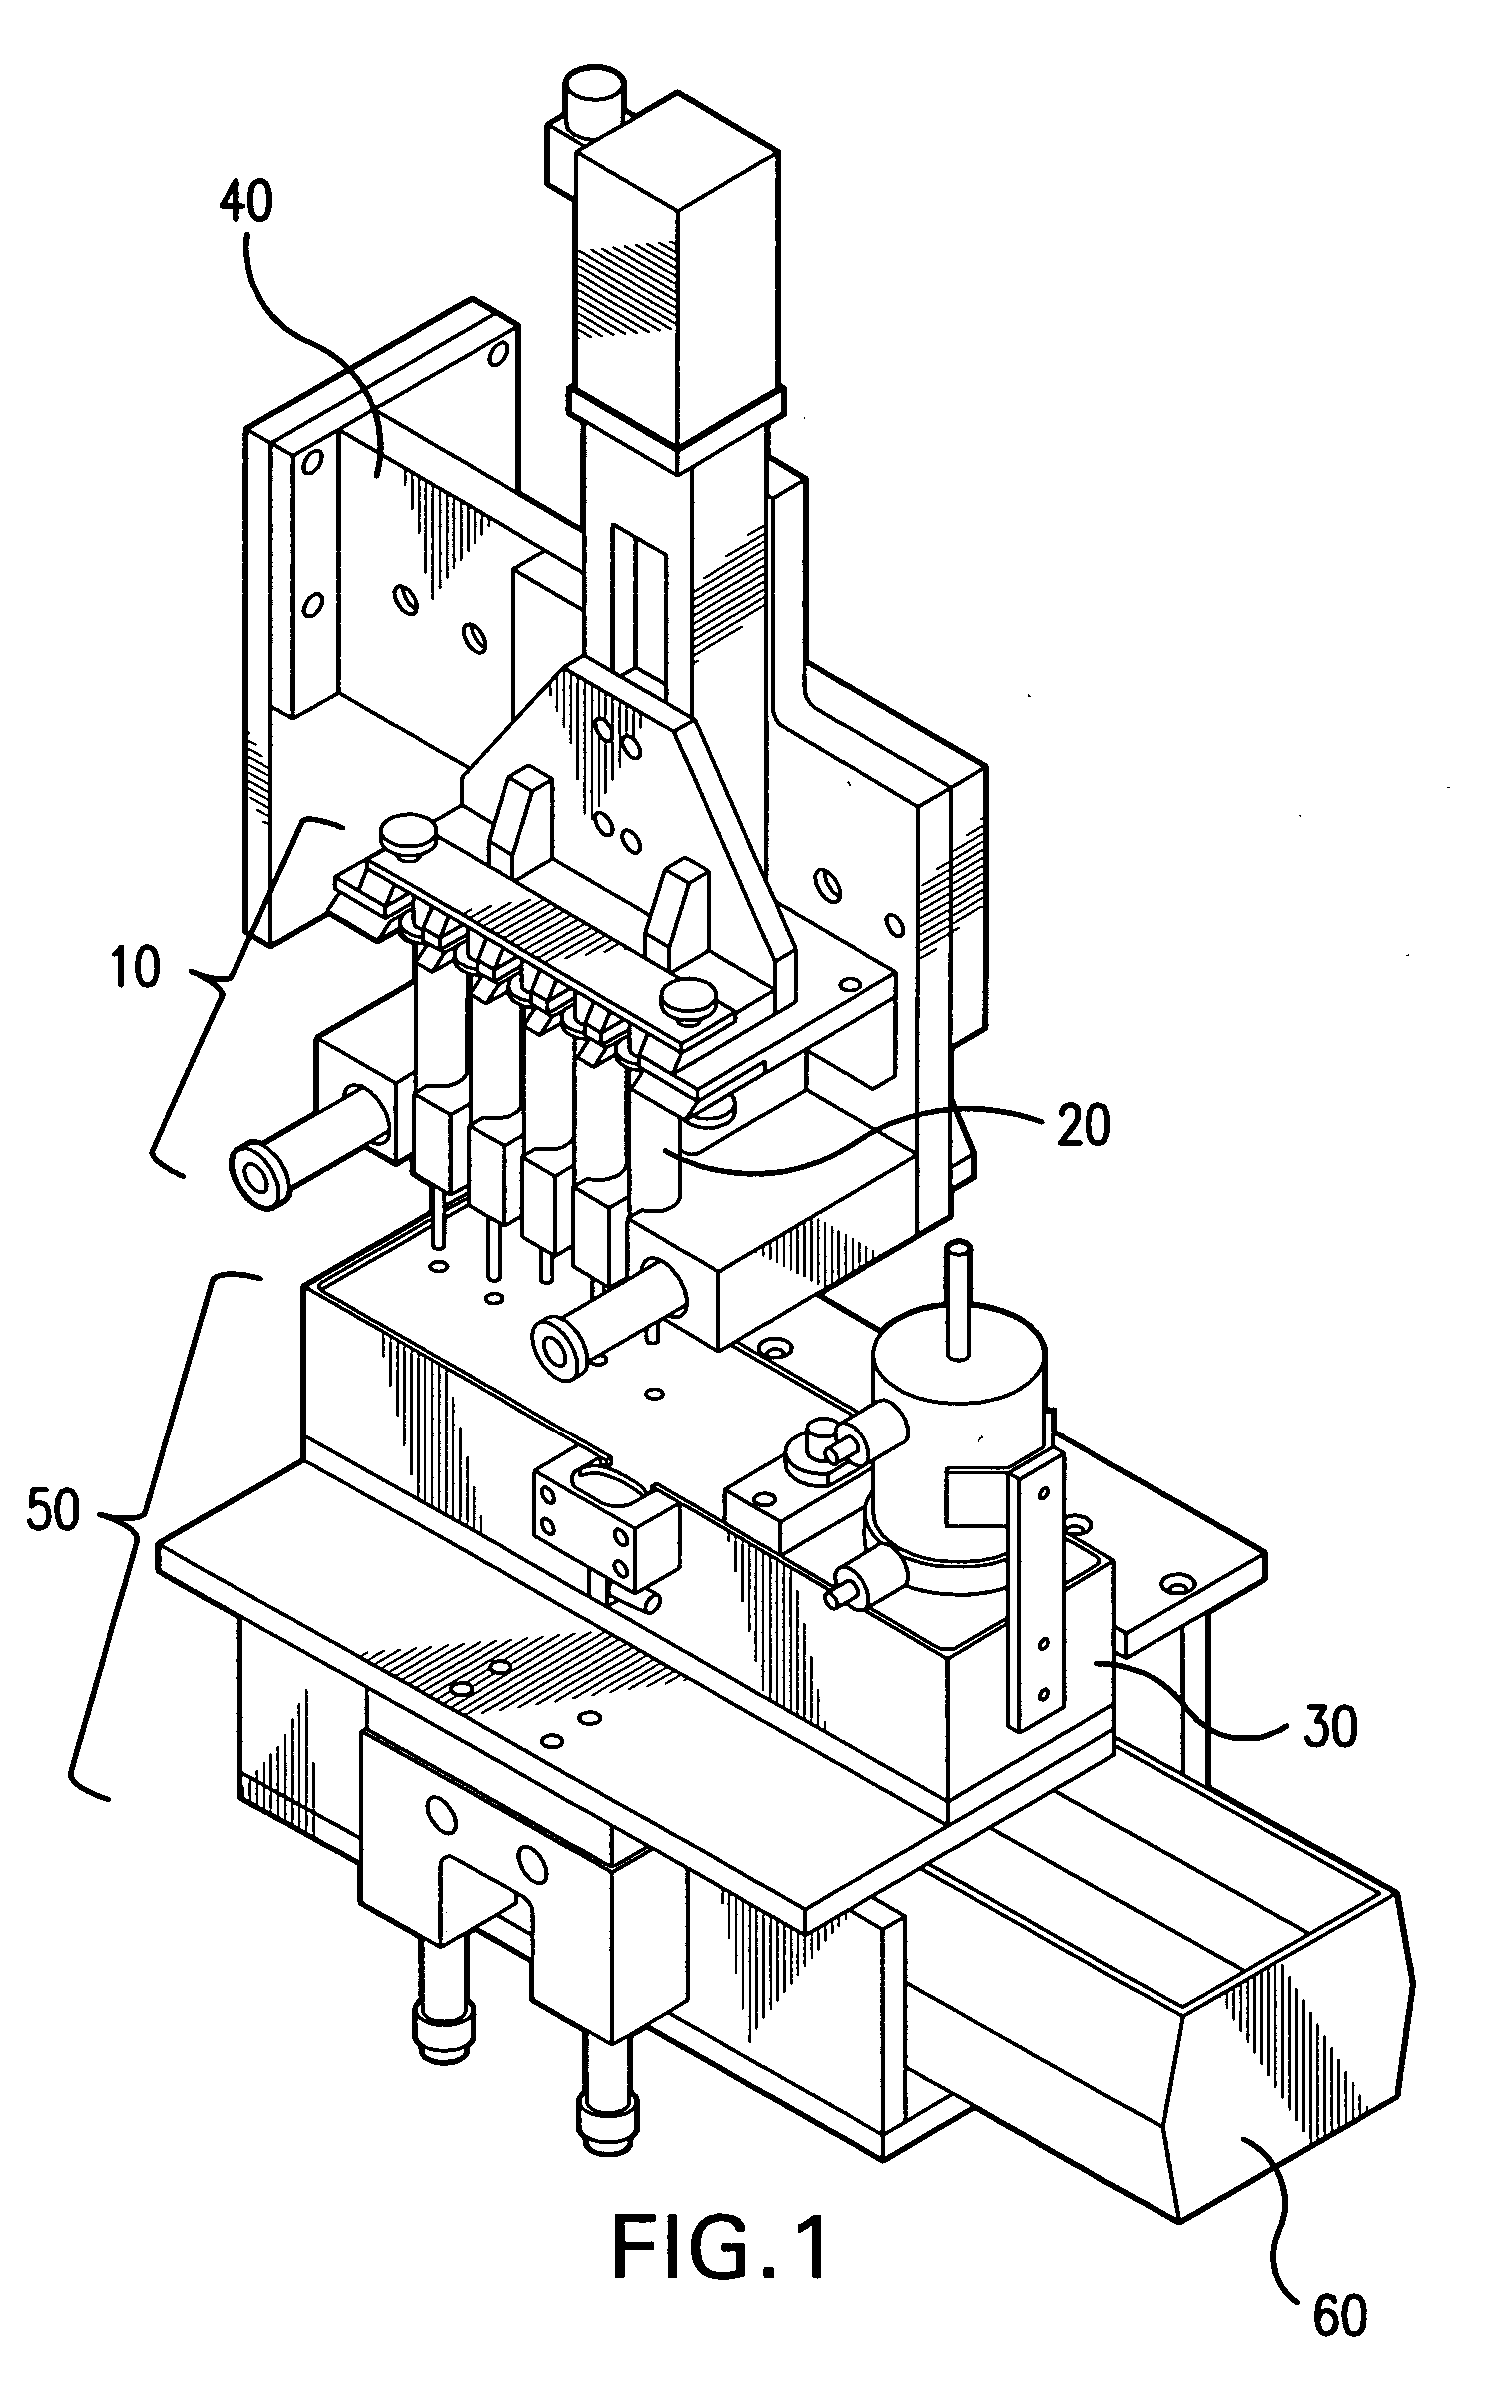 Anti-bacterial syringe and associated reservoir